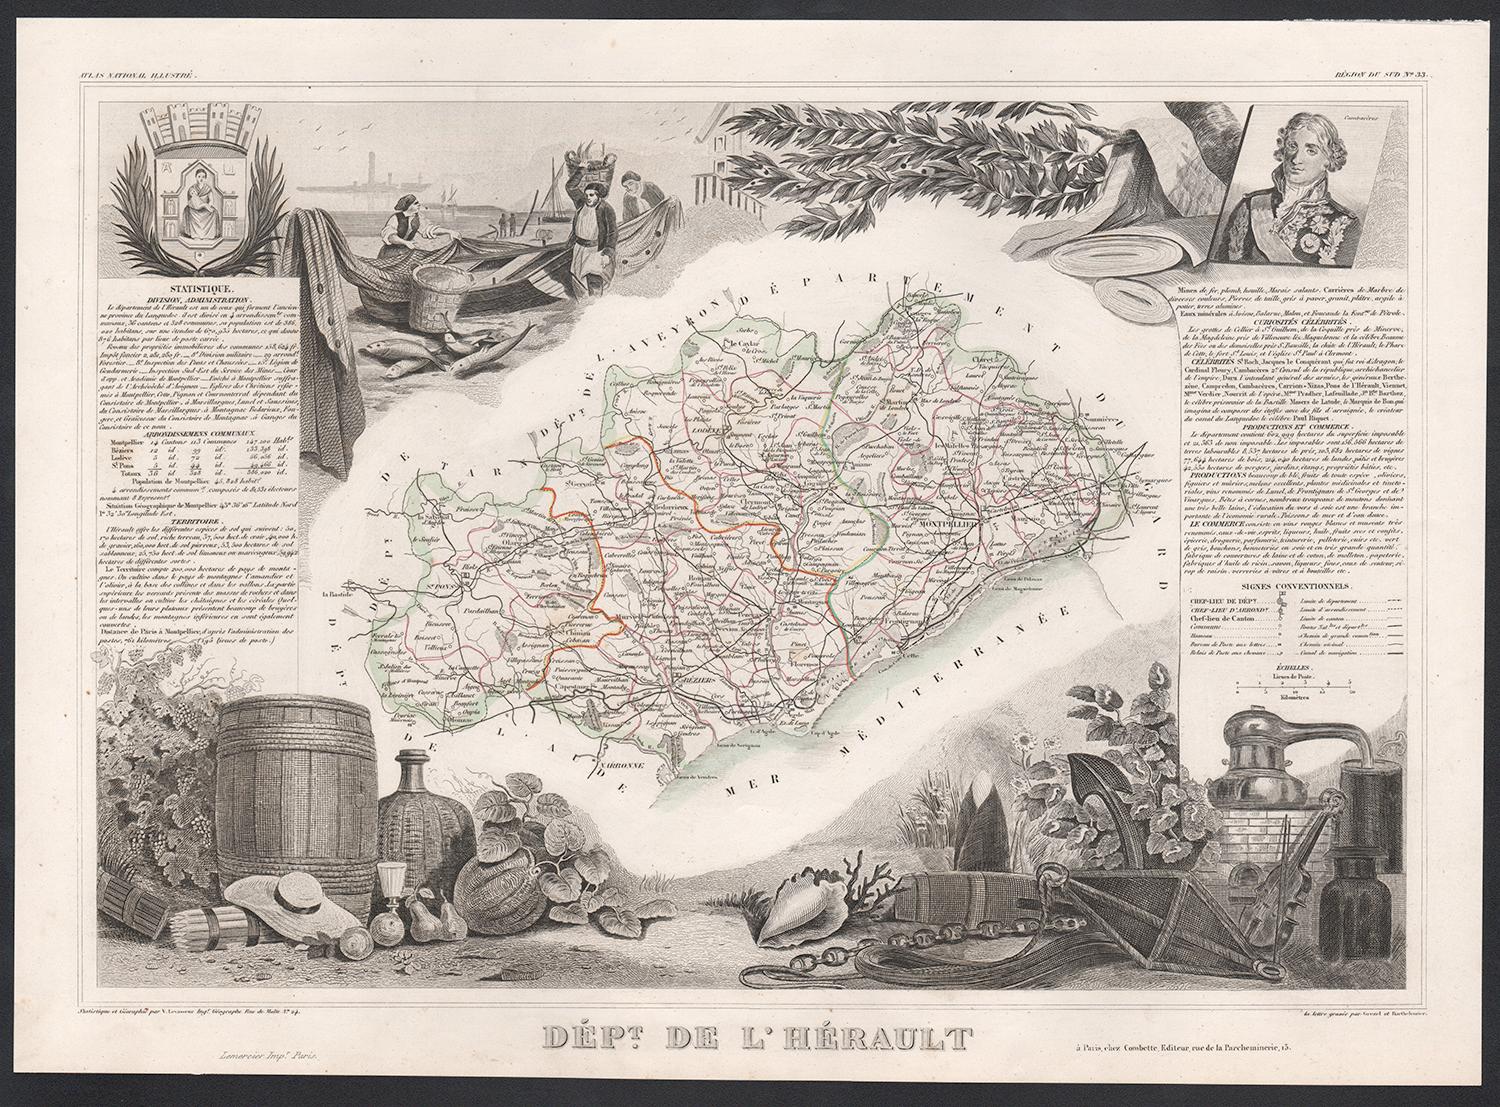 Victor Levasseur Landscape Print - L'Herault, France. Antique map of a French department, 1856